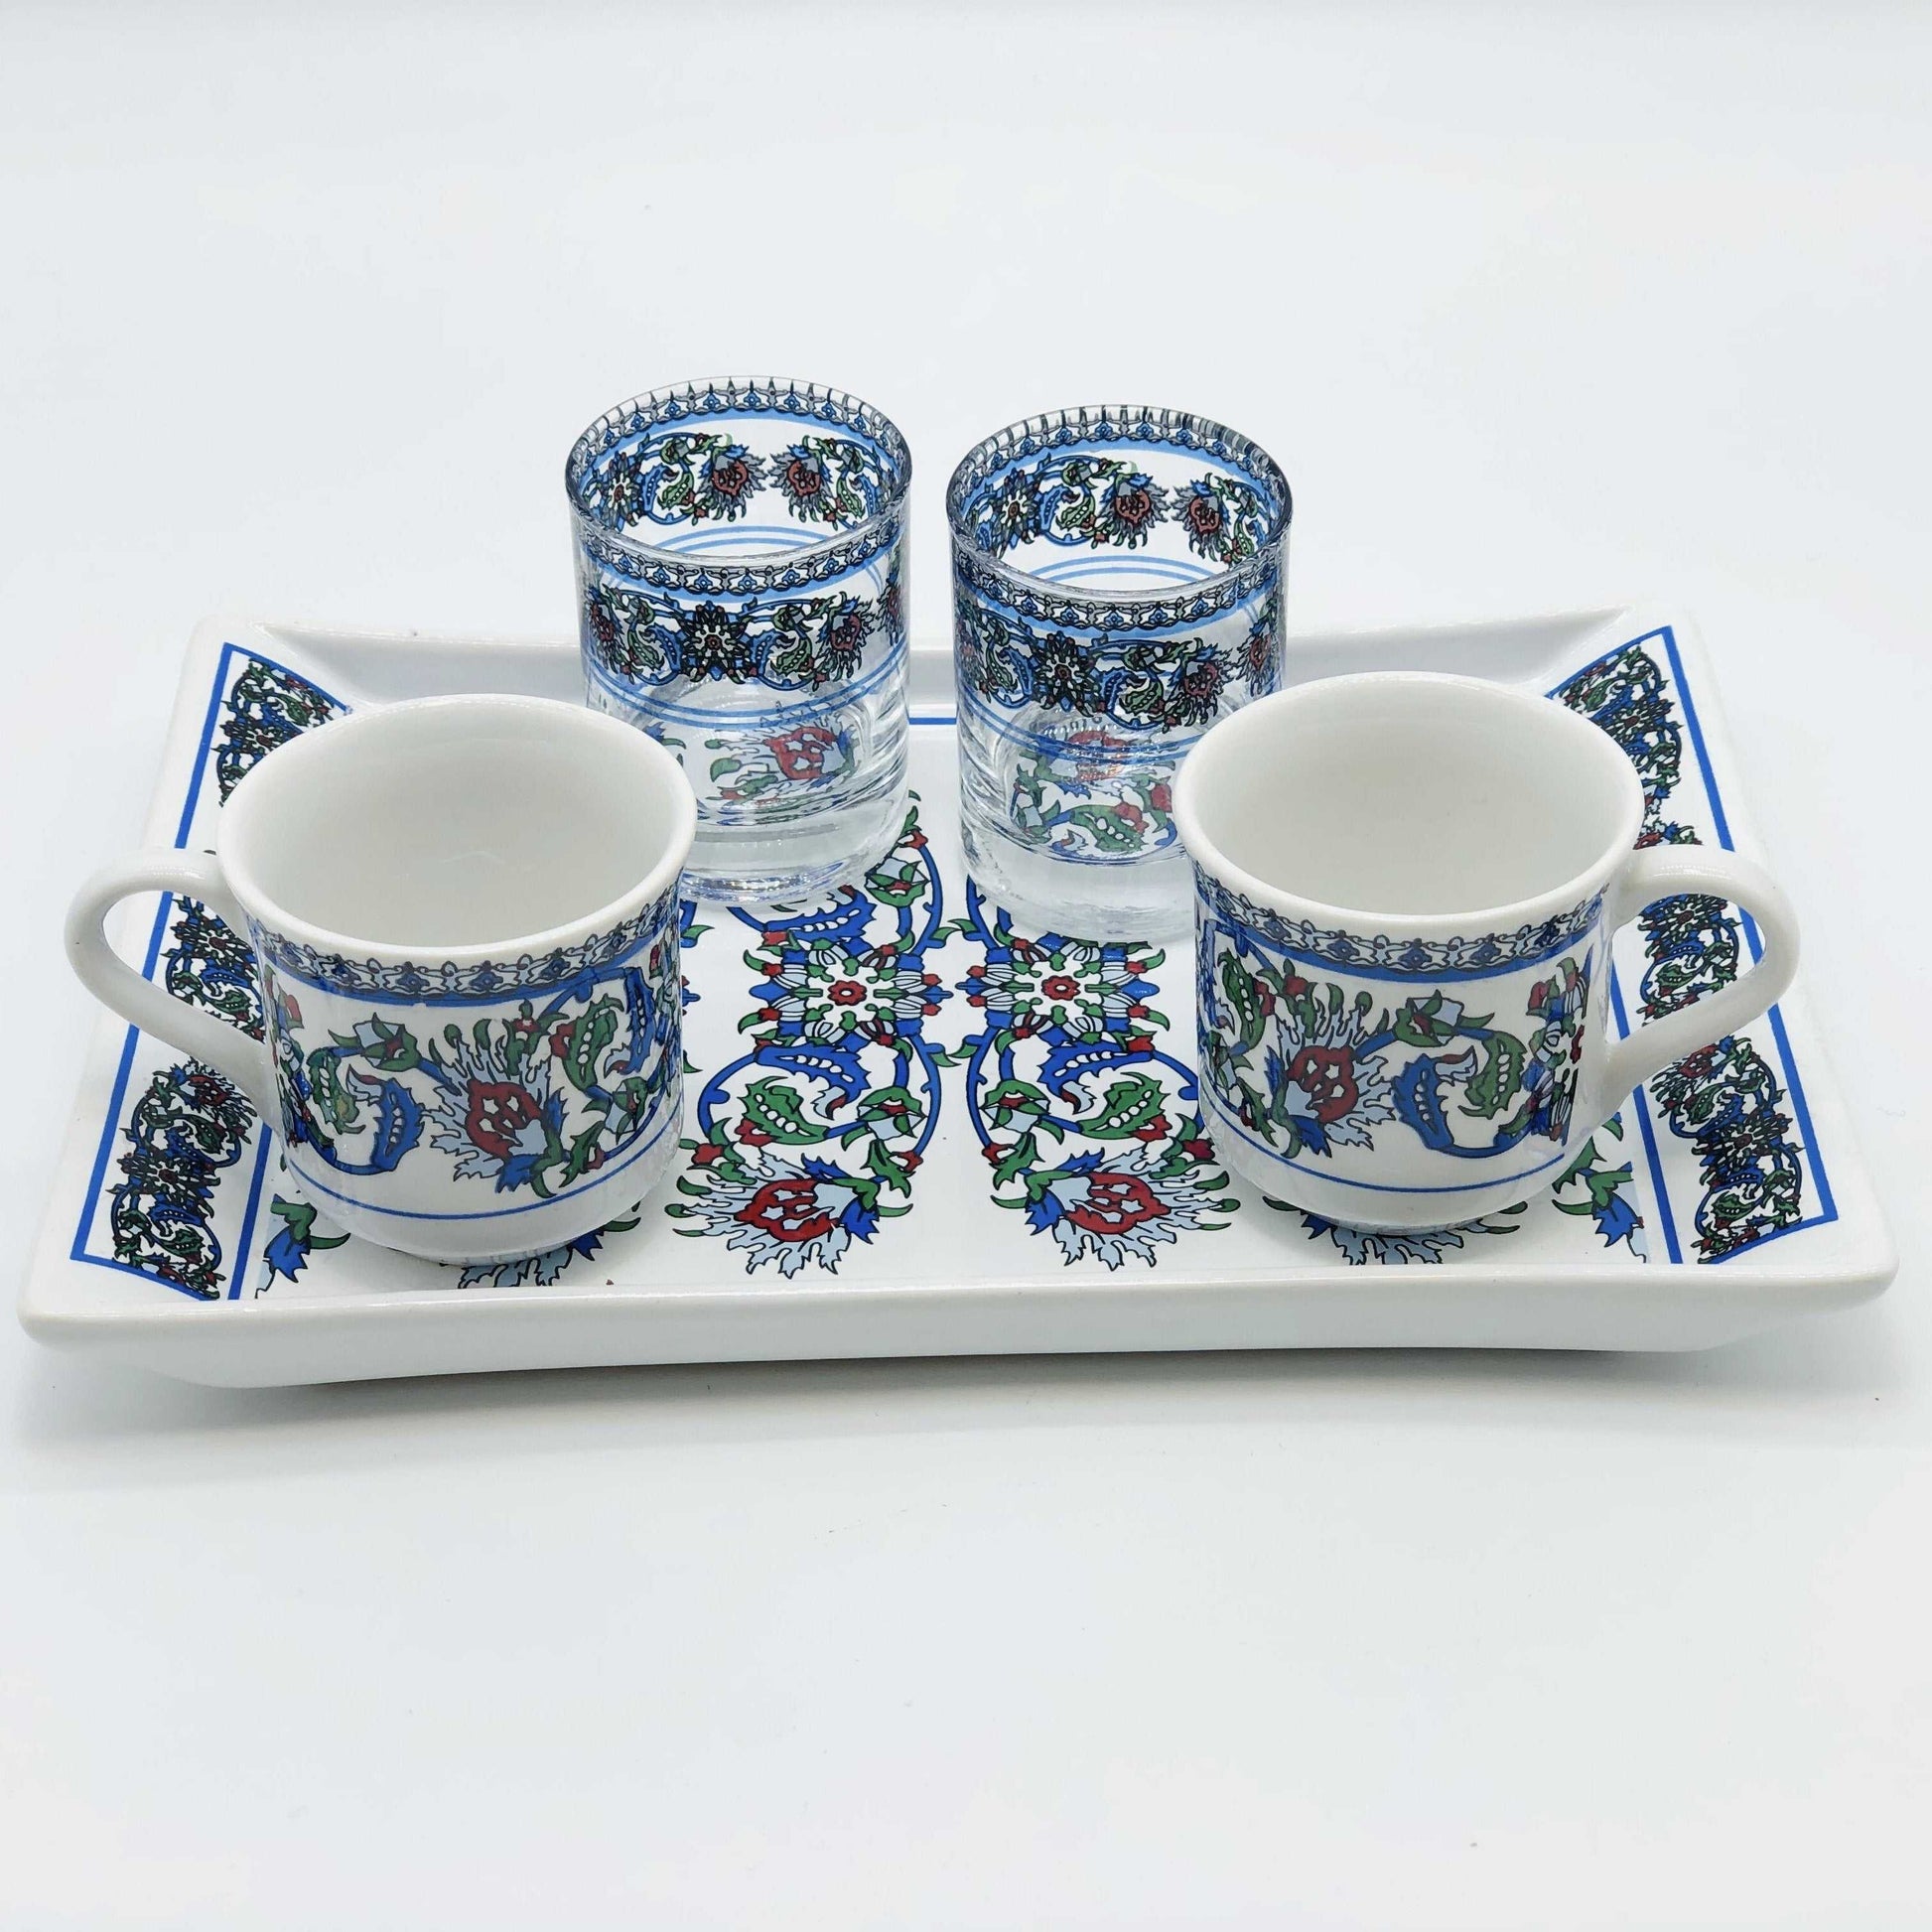 Two Person Turkish Coffee Set Blue Clove